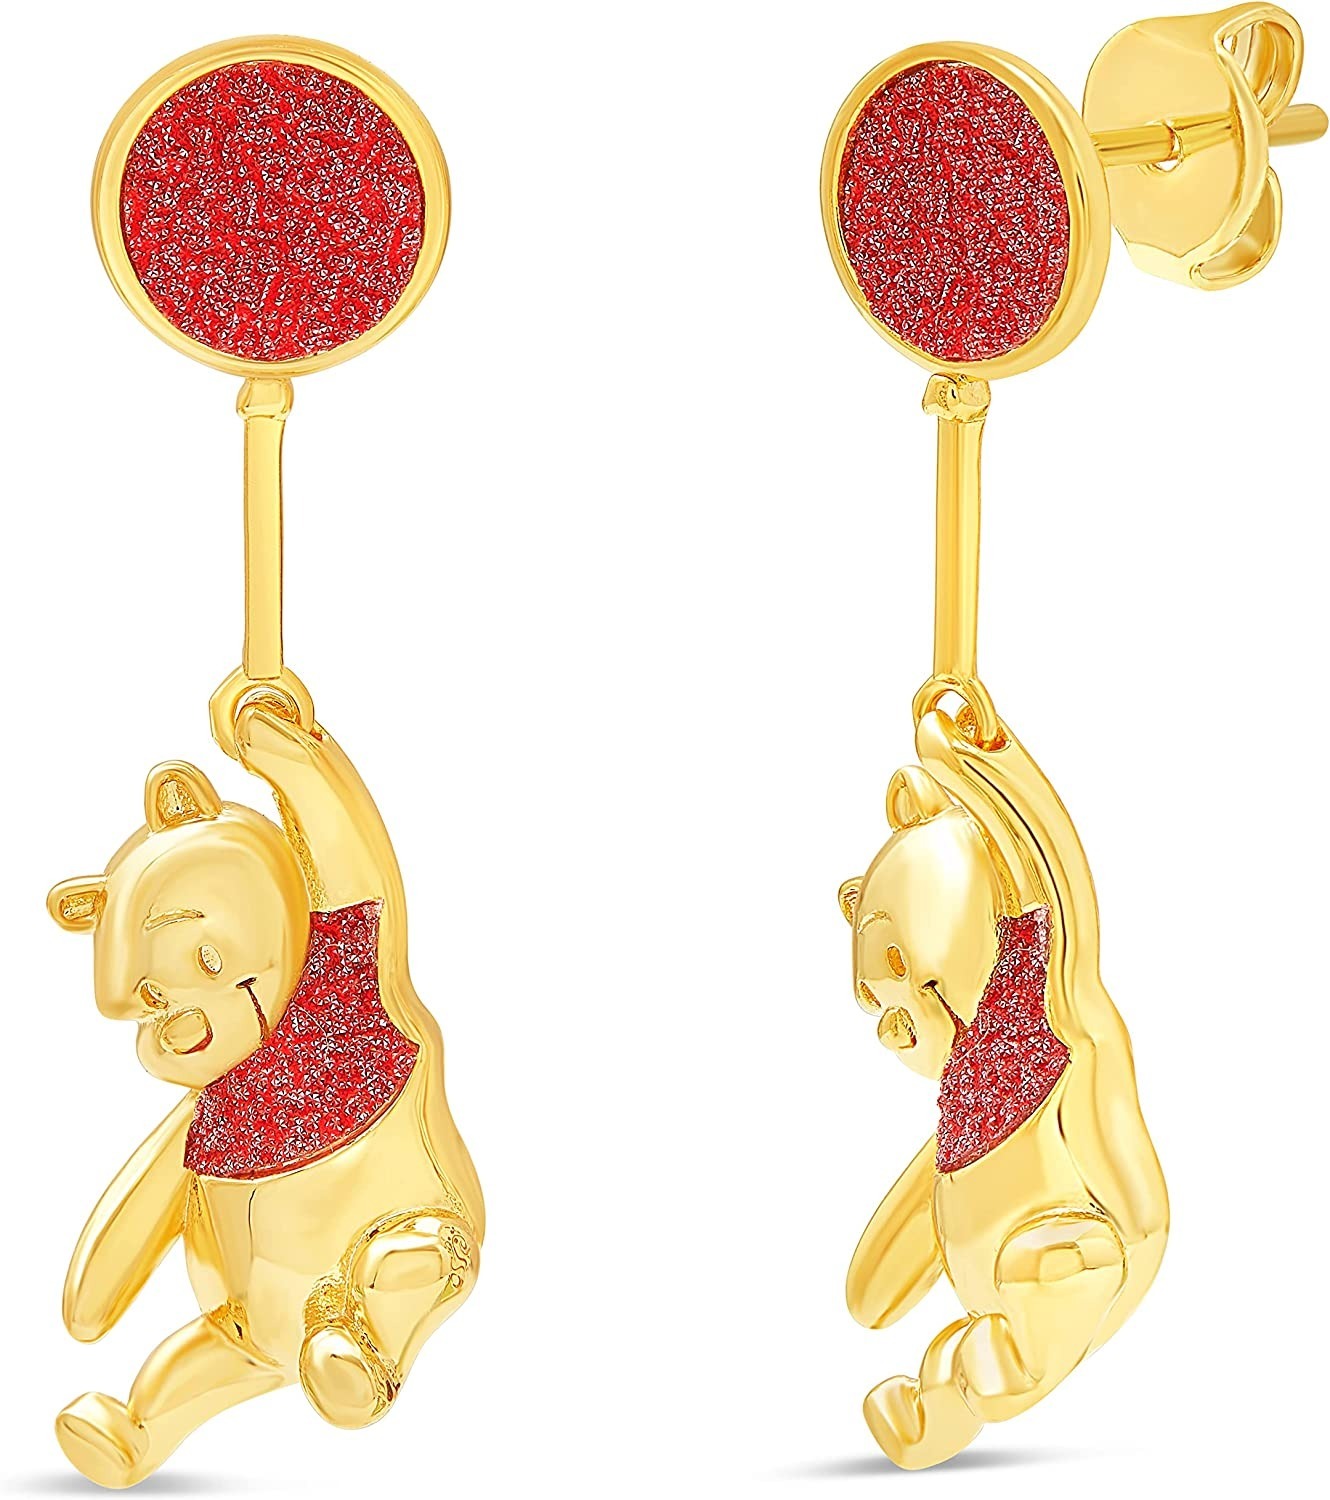 Disney Winnie the Pooh 18K Yellow Gold Plated Women's Earrings $24.99 + Free Shipping